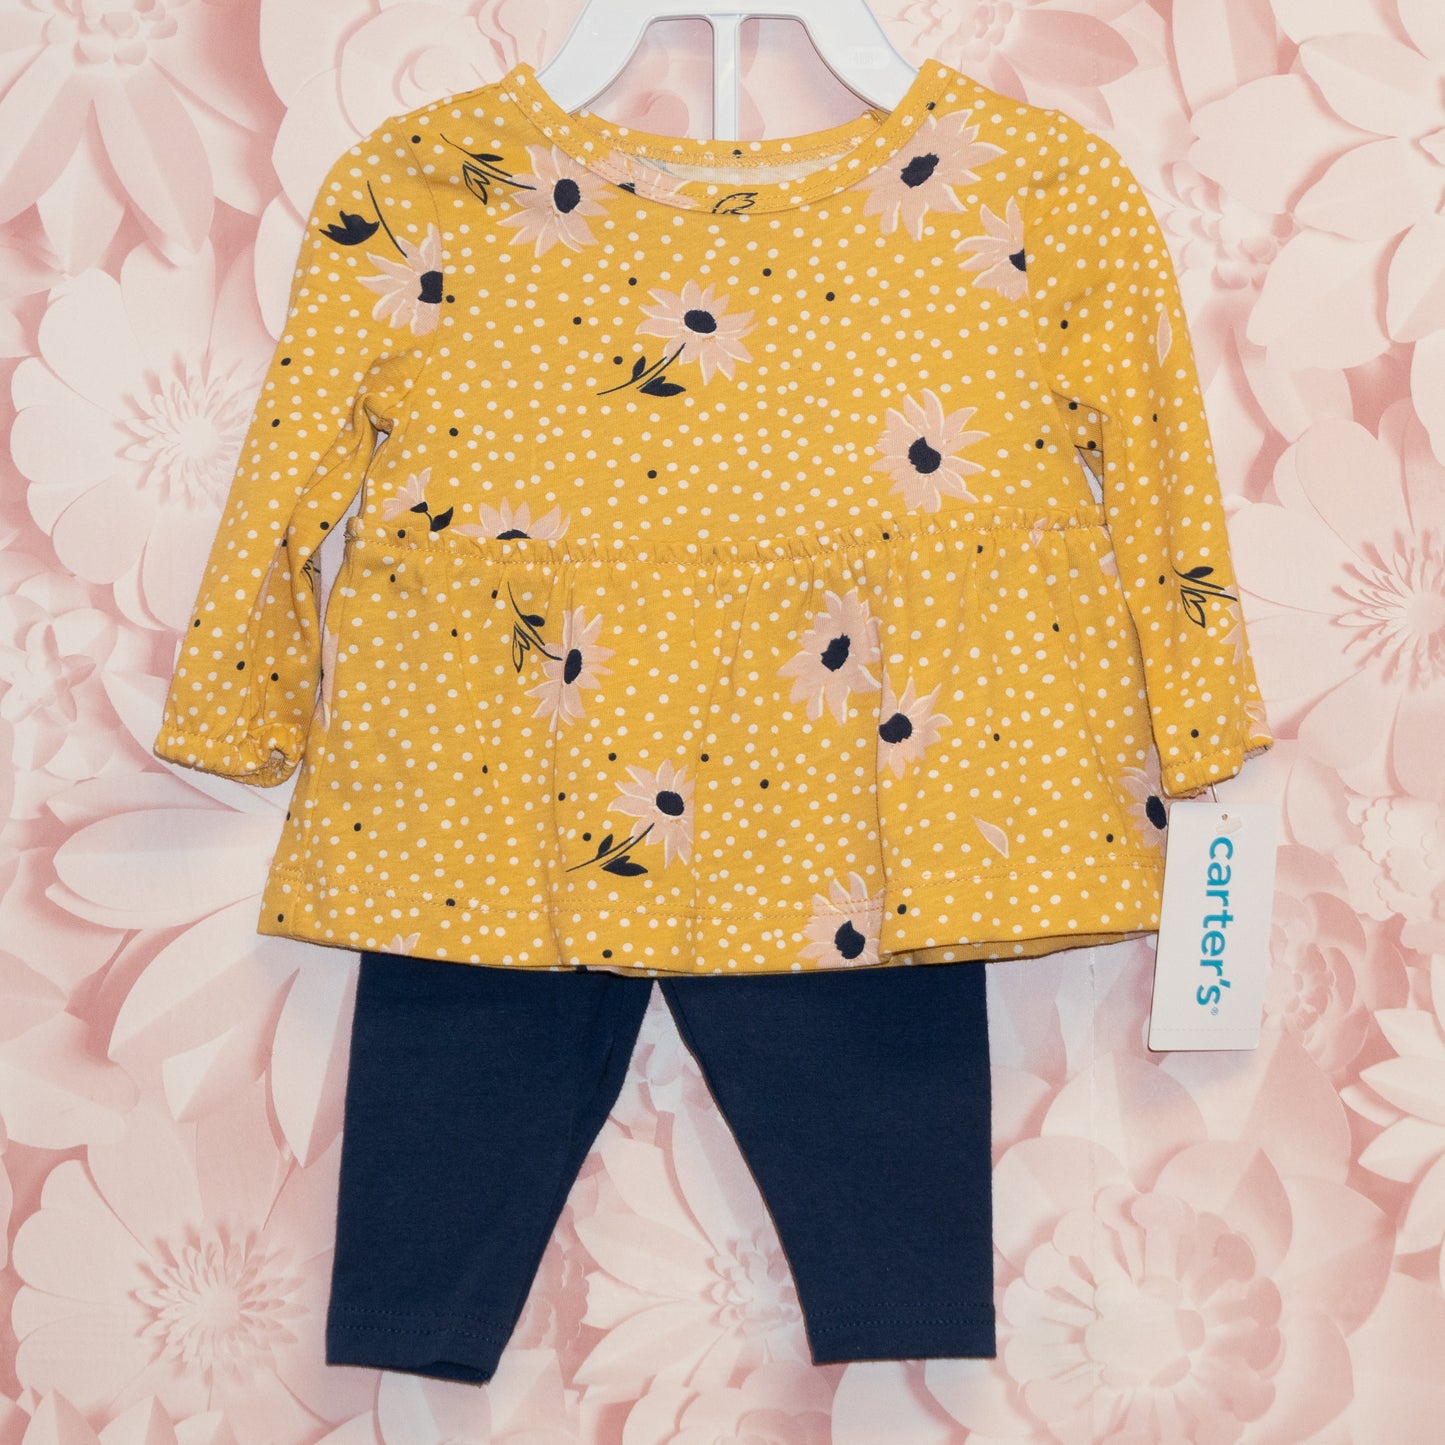 NWT Floral Outfit Size 0-3m